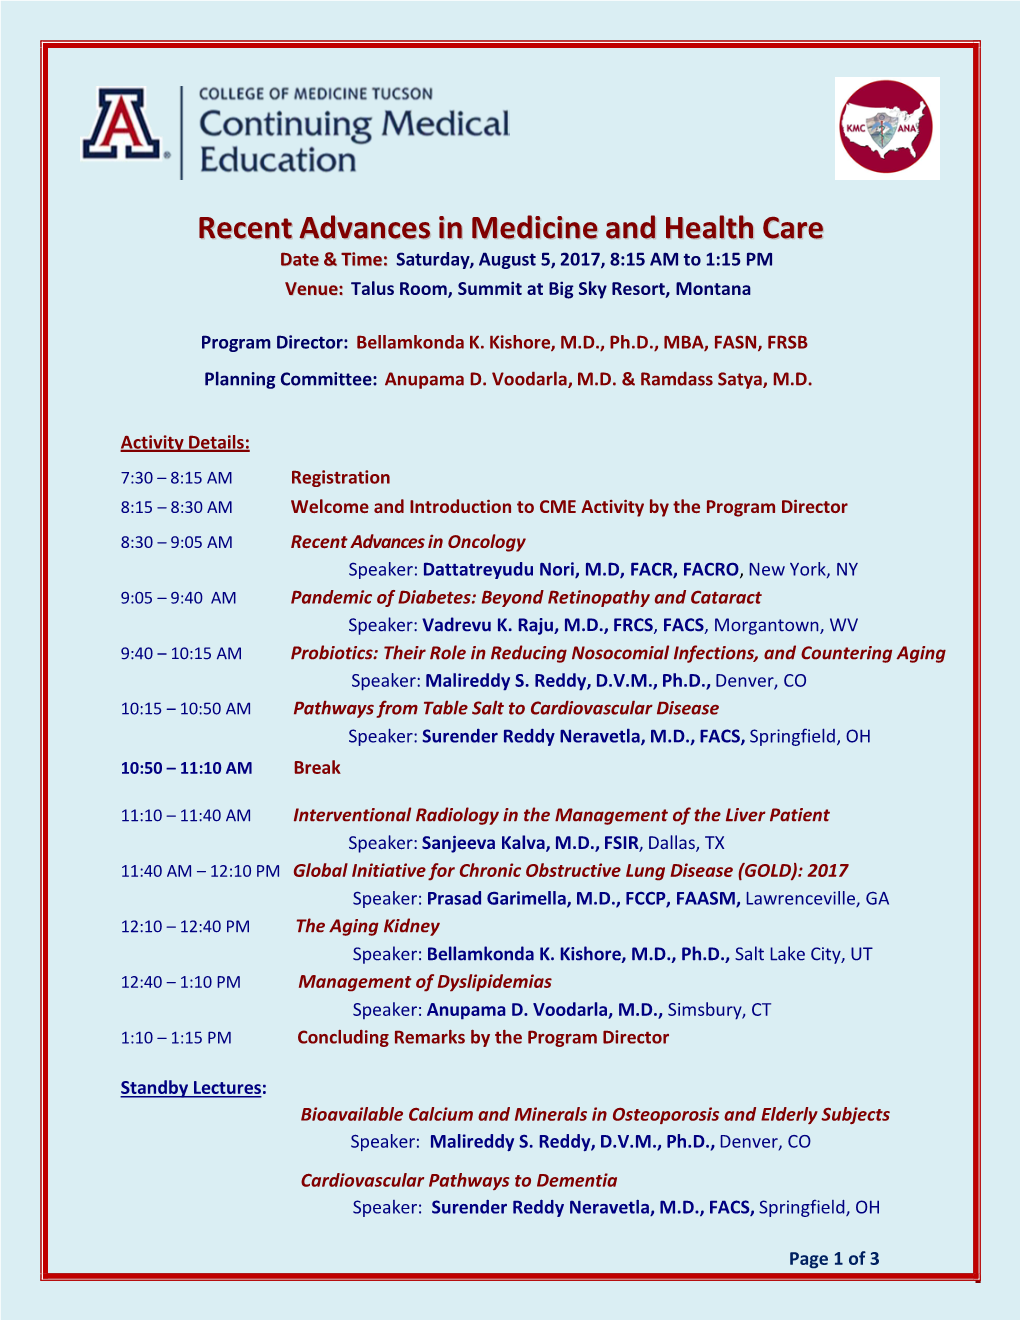 Recent Advances in Medicine and Health Care Date & Time: Saturday, August 5, 2017, 8:15 AM to 1:15 PM Venue: Talus Room, Summit at Big Sky Resort, Montana